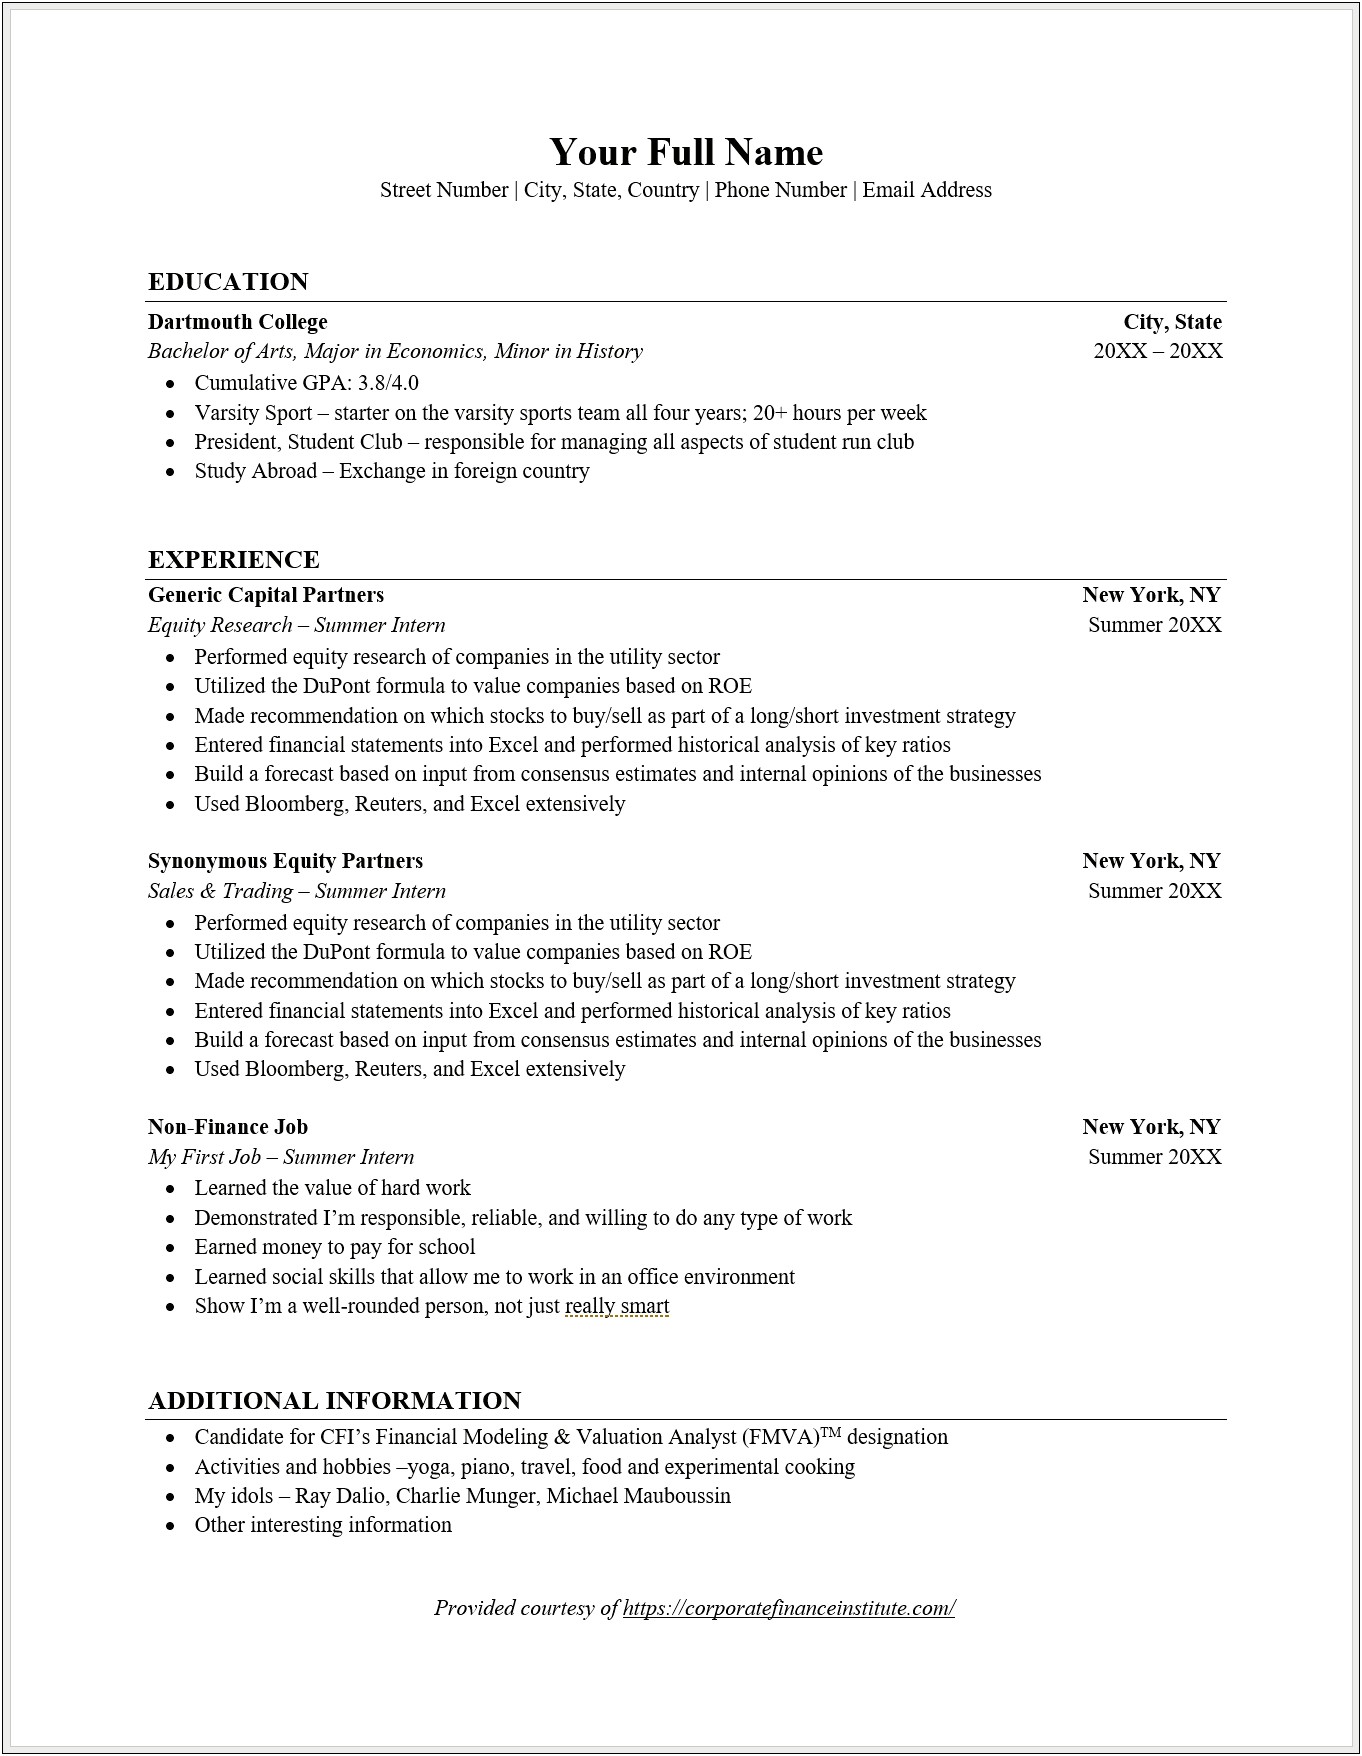 Sample Resume With Pay History